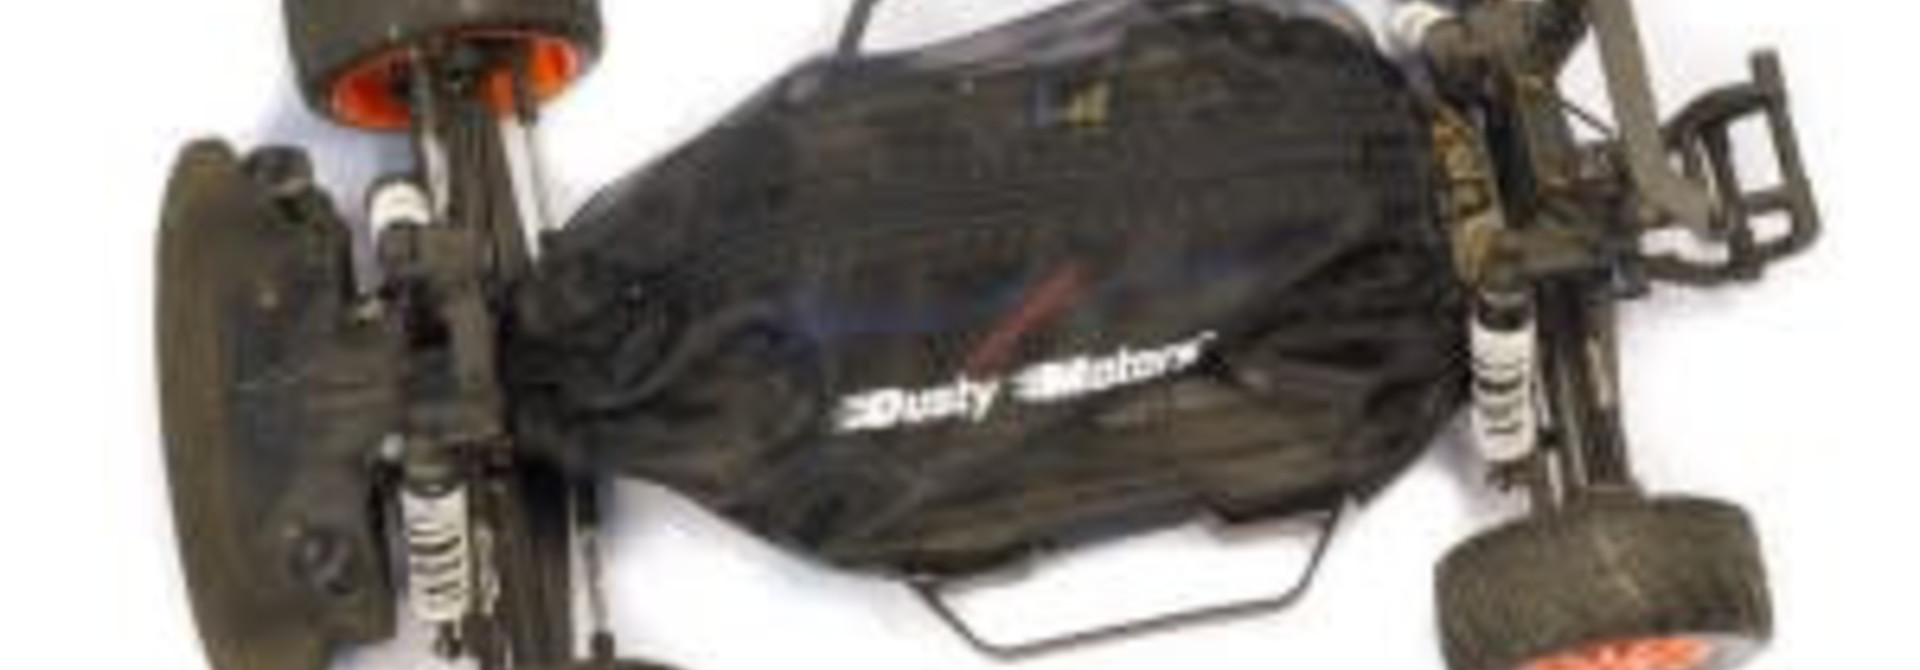 Dusty Motors Universal adjustable protection cover size M, DMC1012